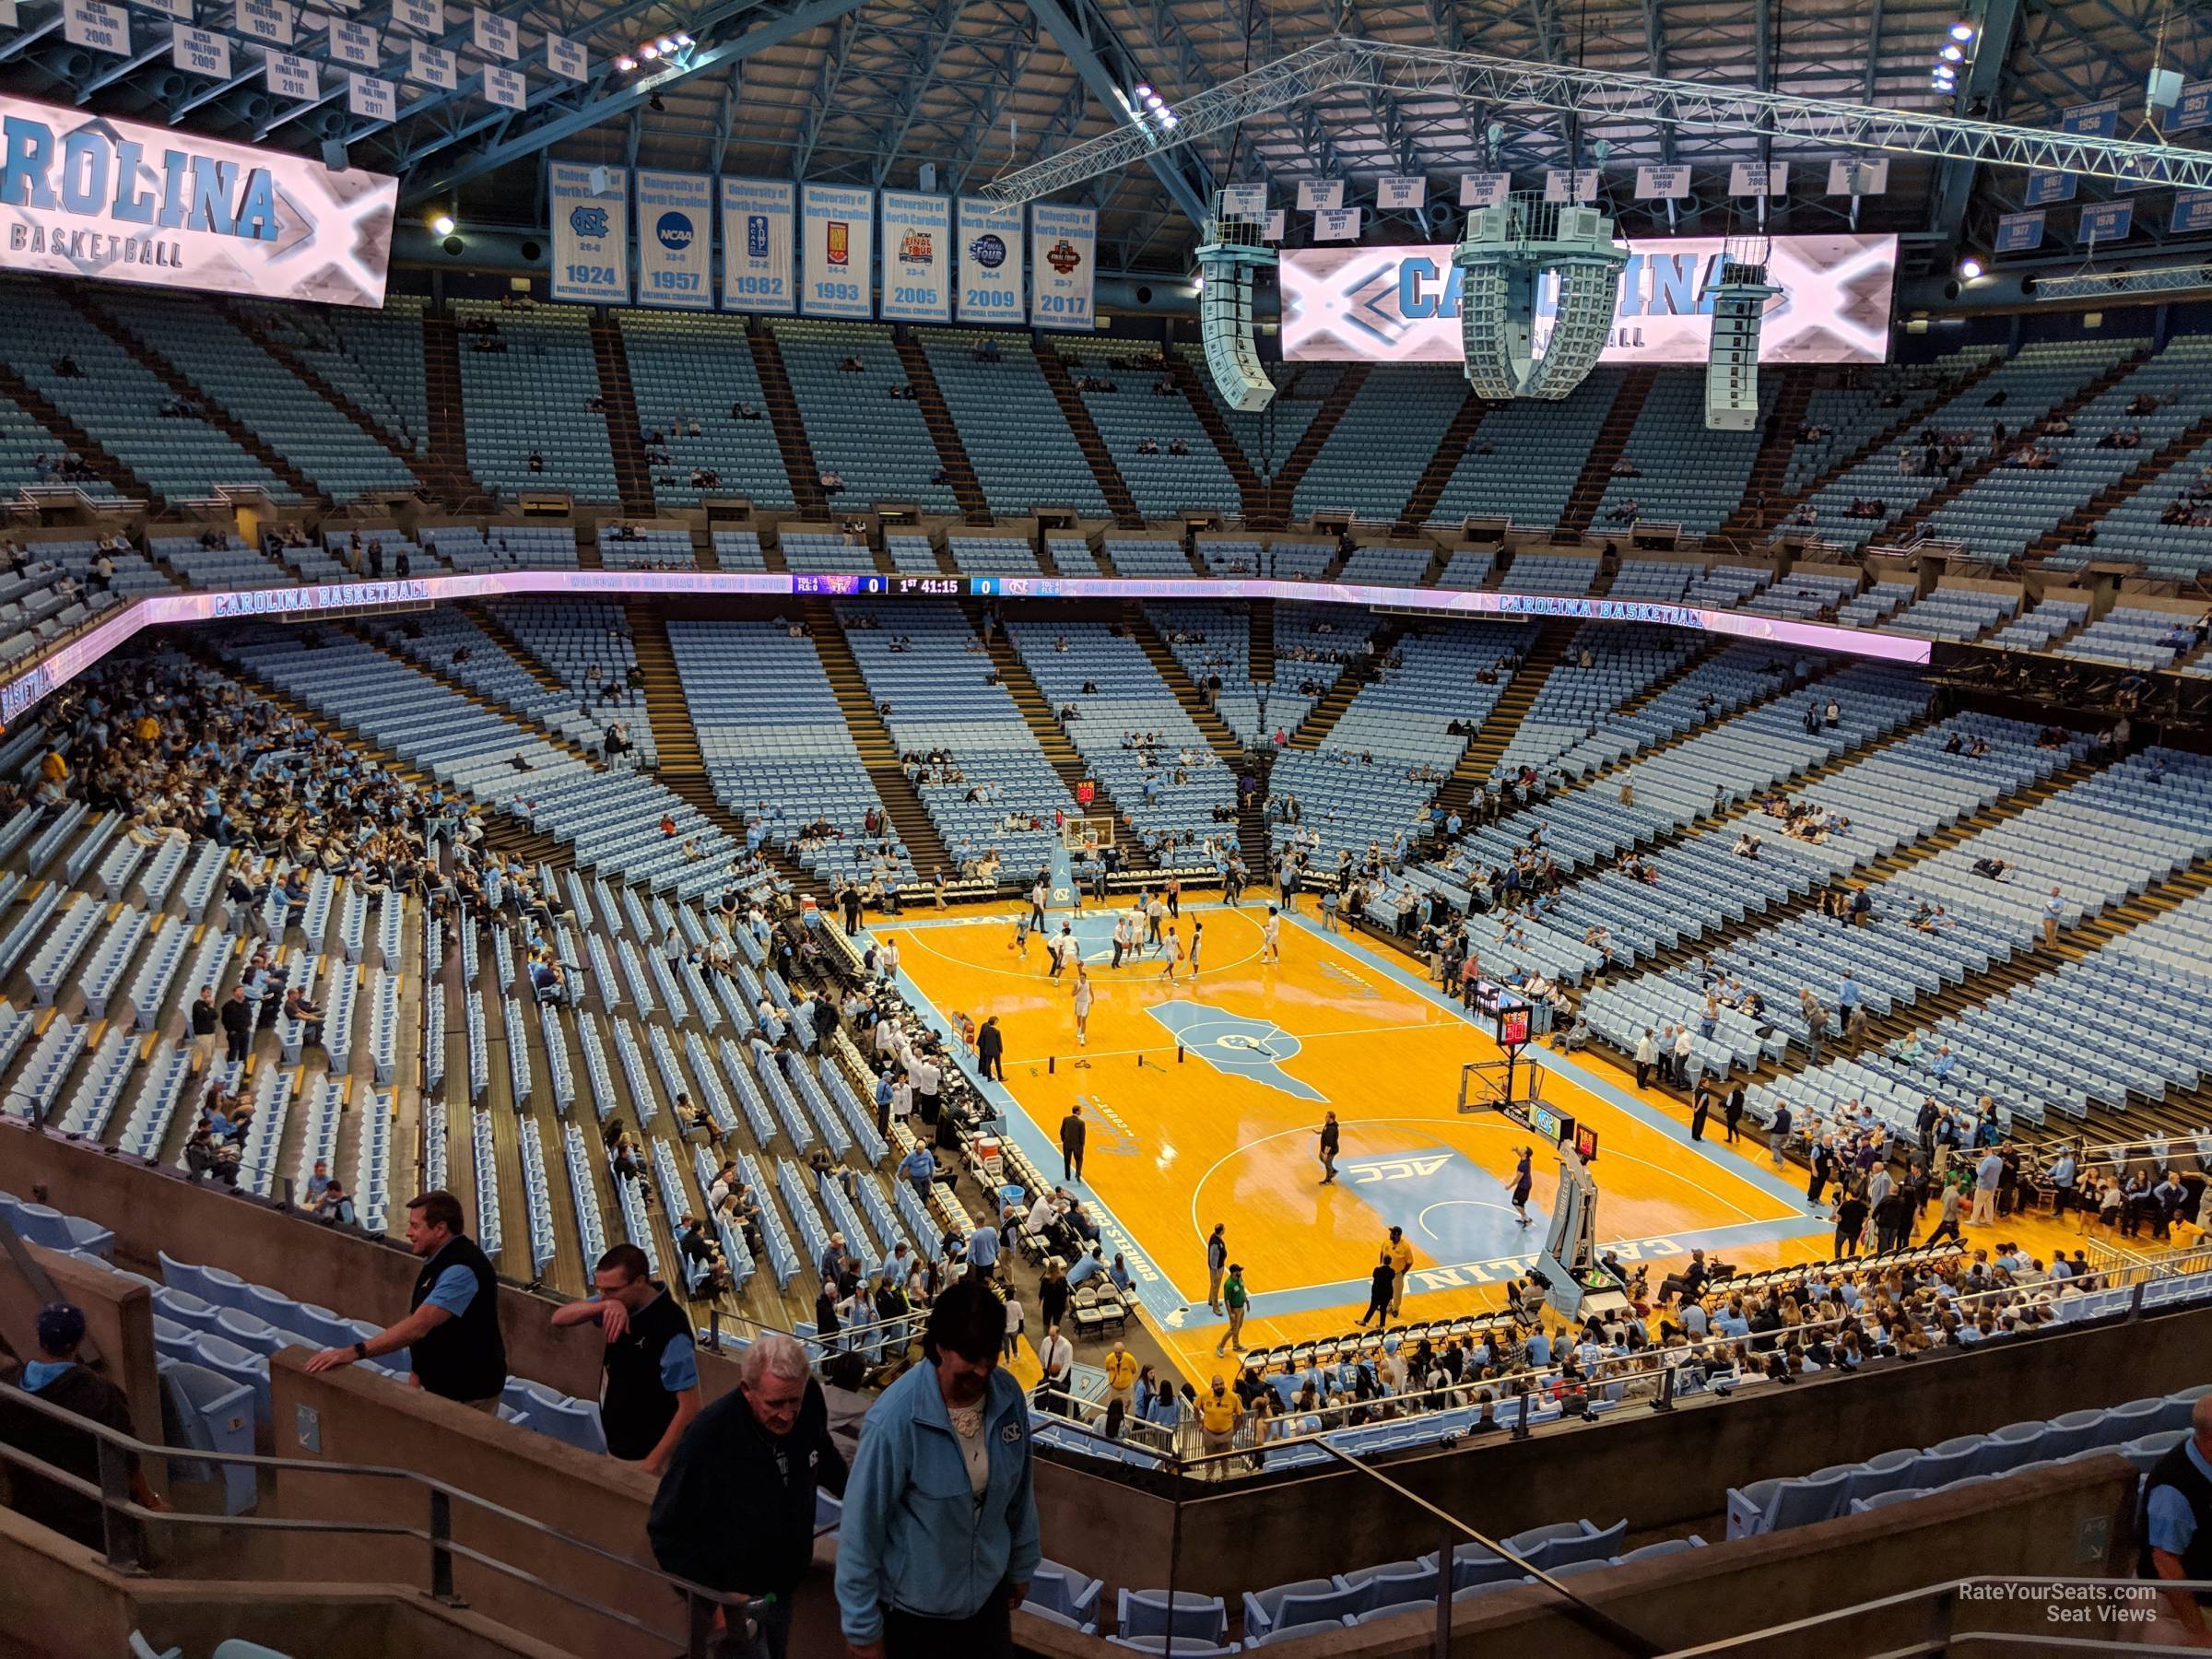 section 214a, row i seat view  - dean smith center